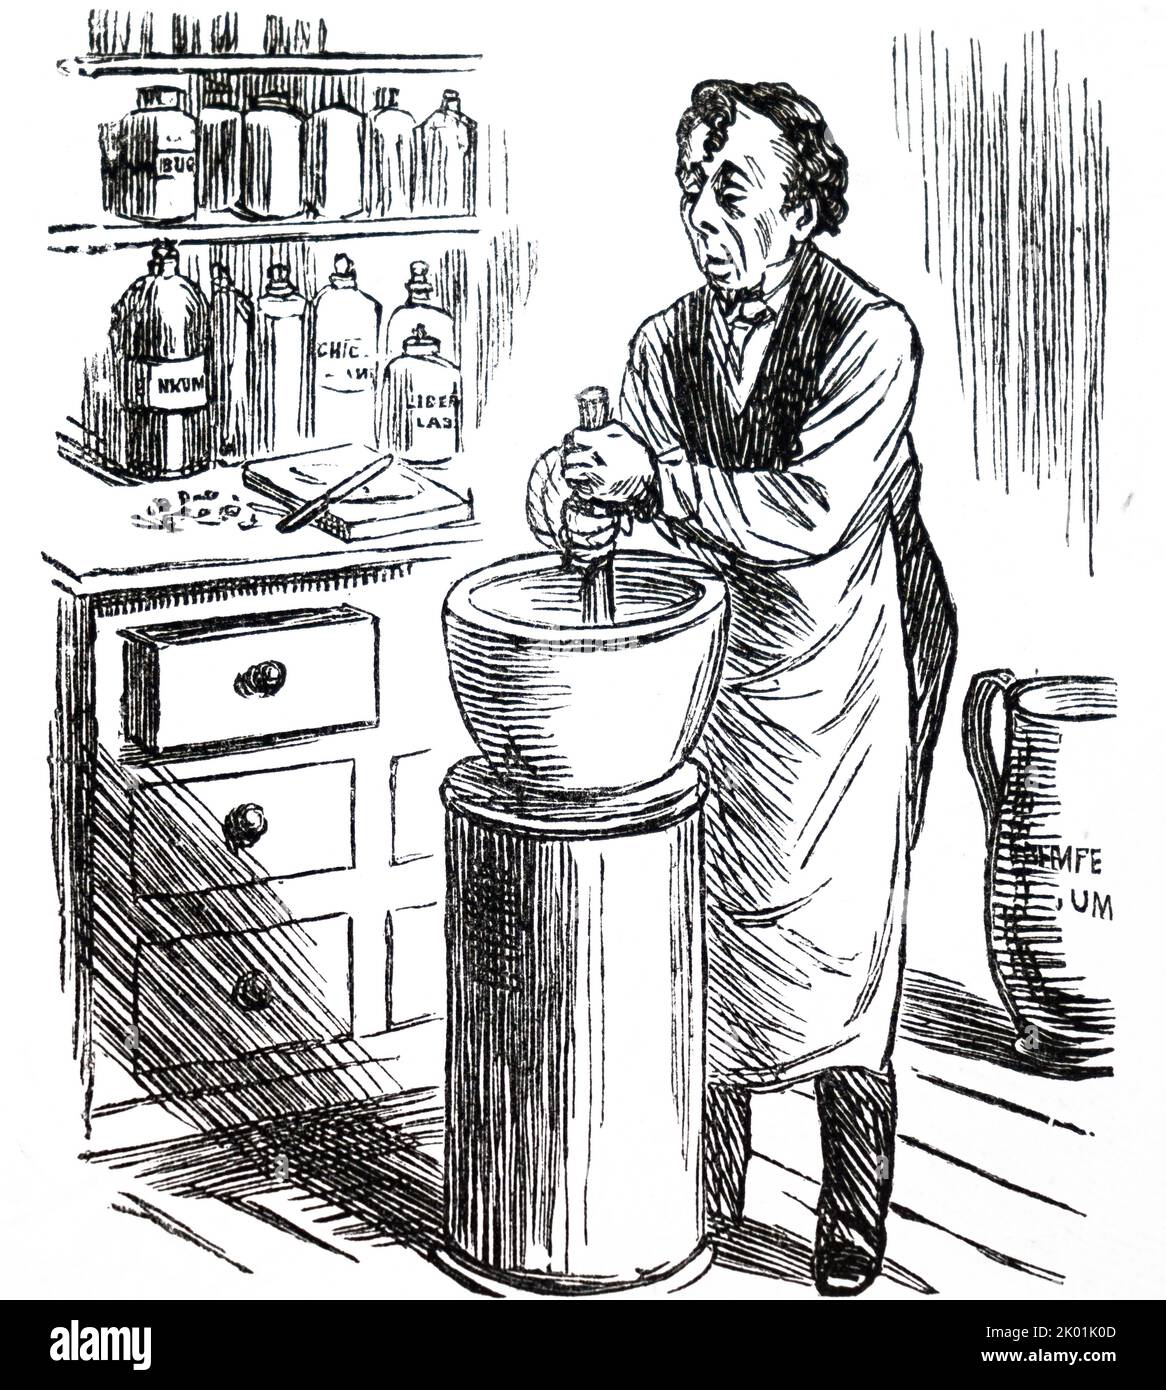 The Apothecary (Disraeli) mixing the (election) pill in a pestel and mortar. 1880. Stock Photo